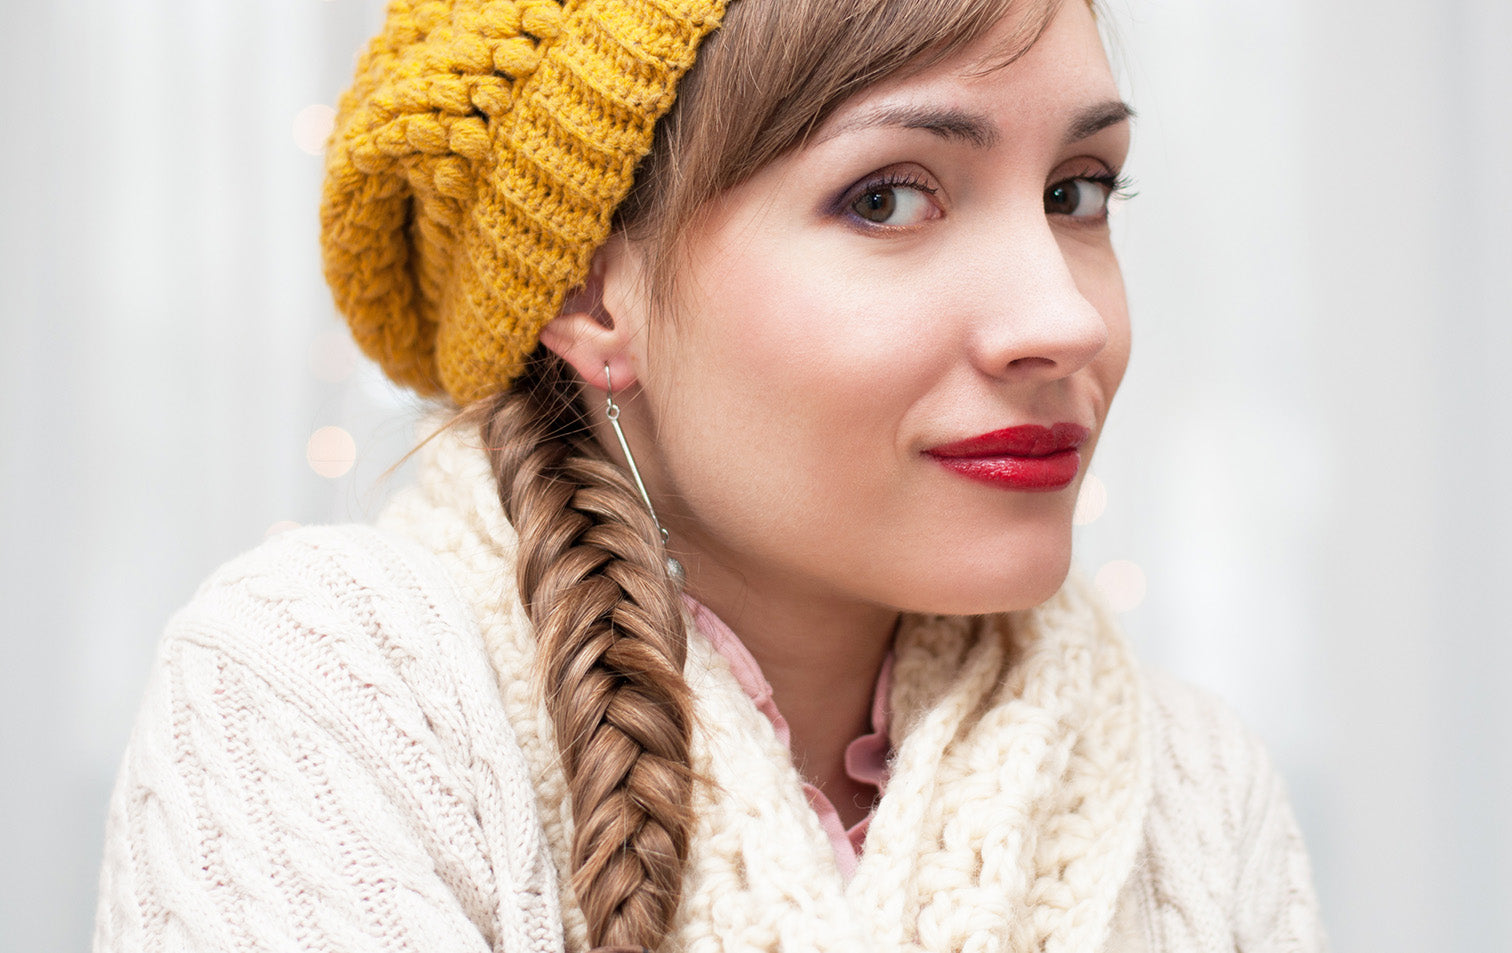 How to Do a Fishtail Braid: Step-by-Step for 4 Popular Styles